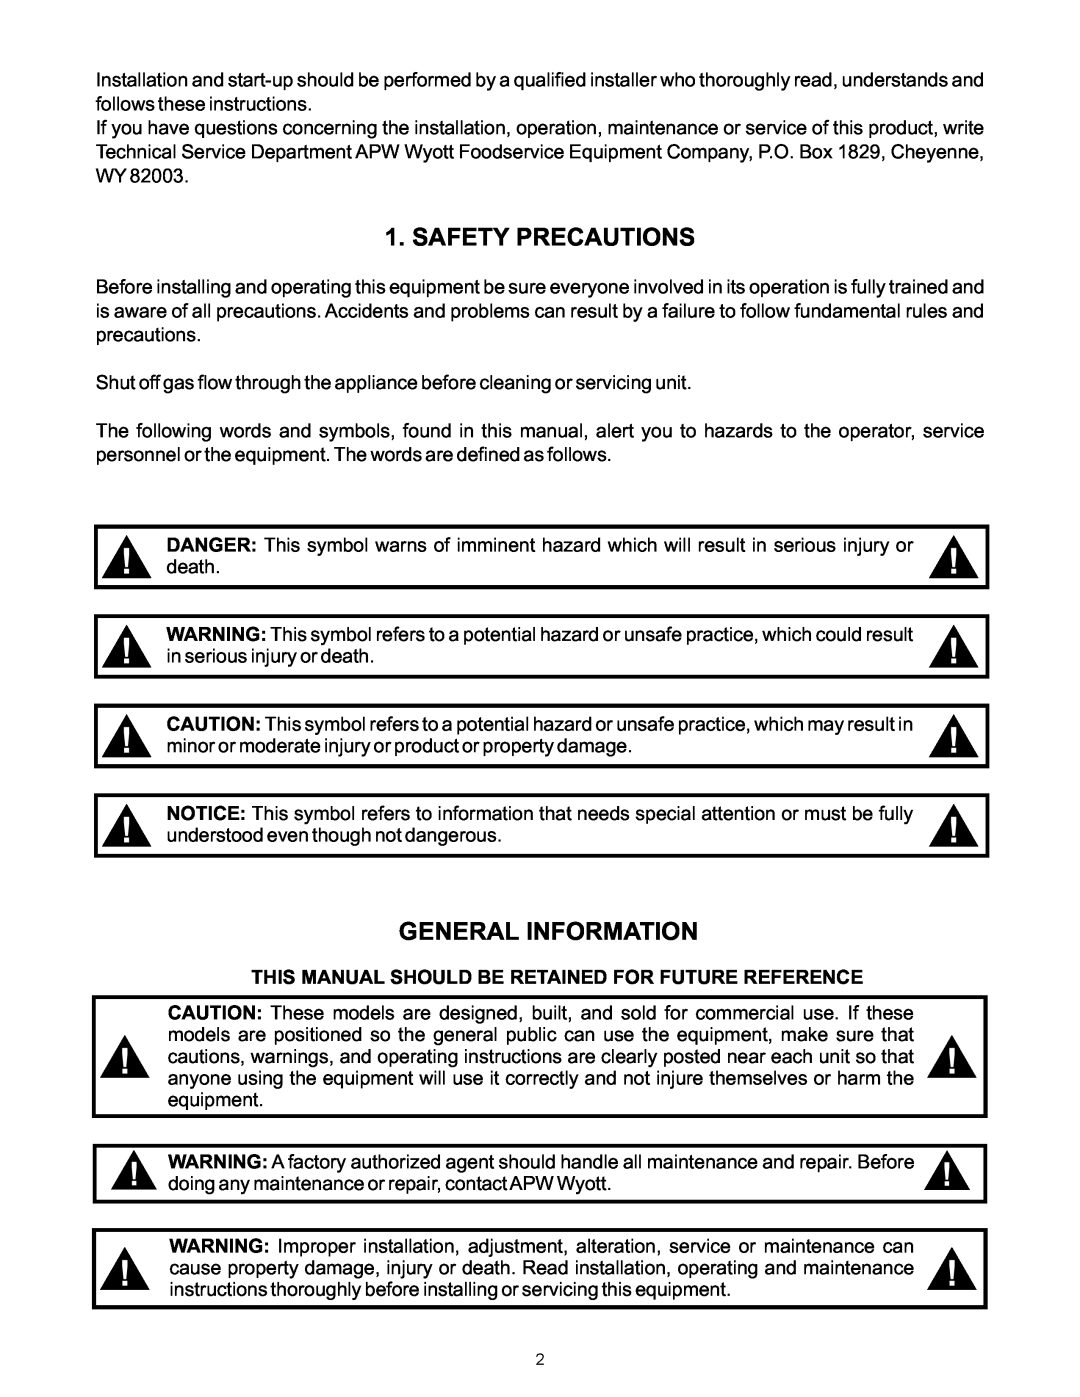 APW Wyott GHP-6H, GHPS-2H, GHPW-2H, GHPS-6H, GHPS-4H, GHP-4H operating instructions Safety Precautions, General Information 